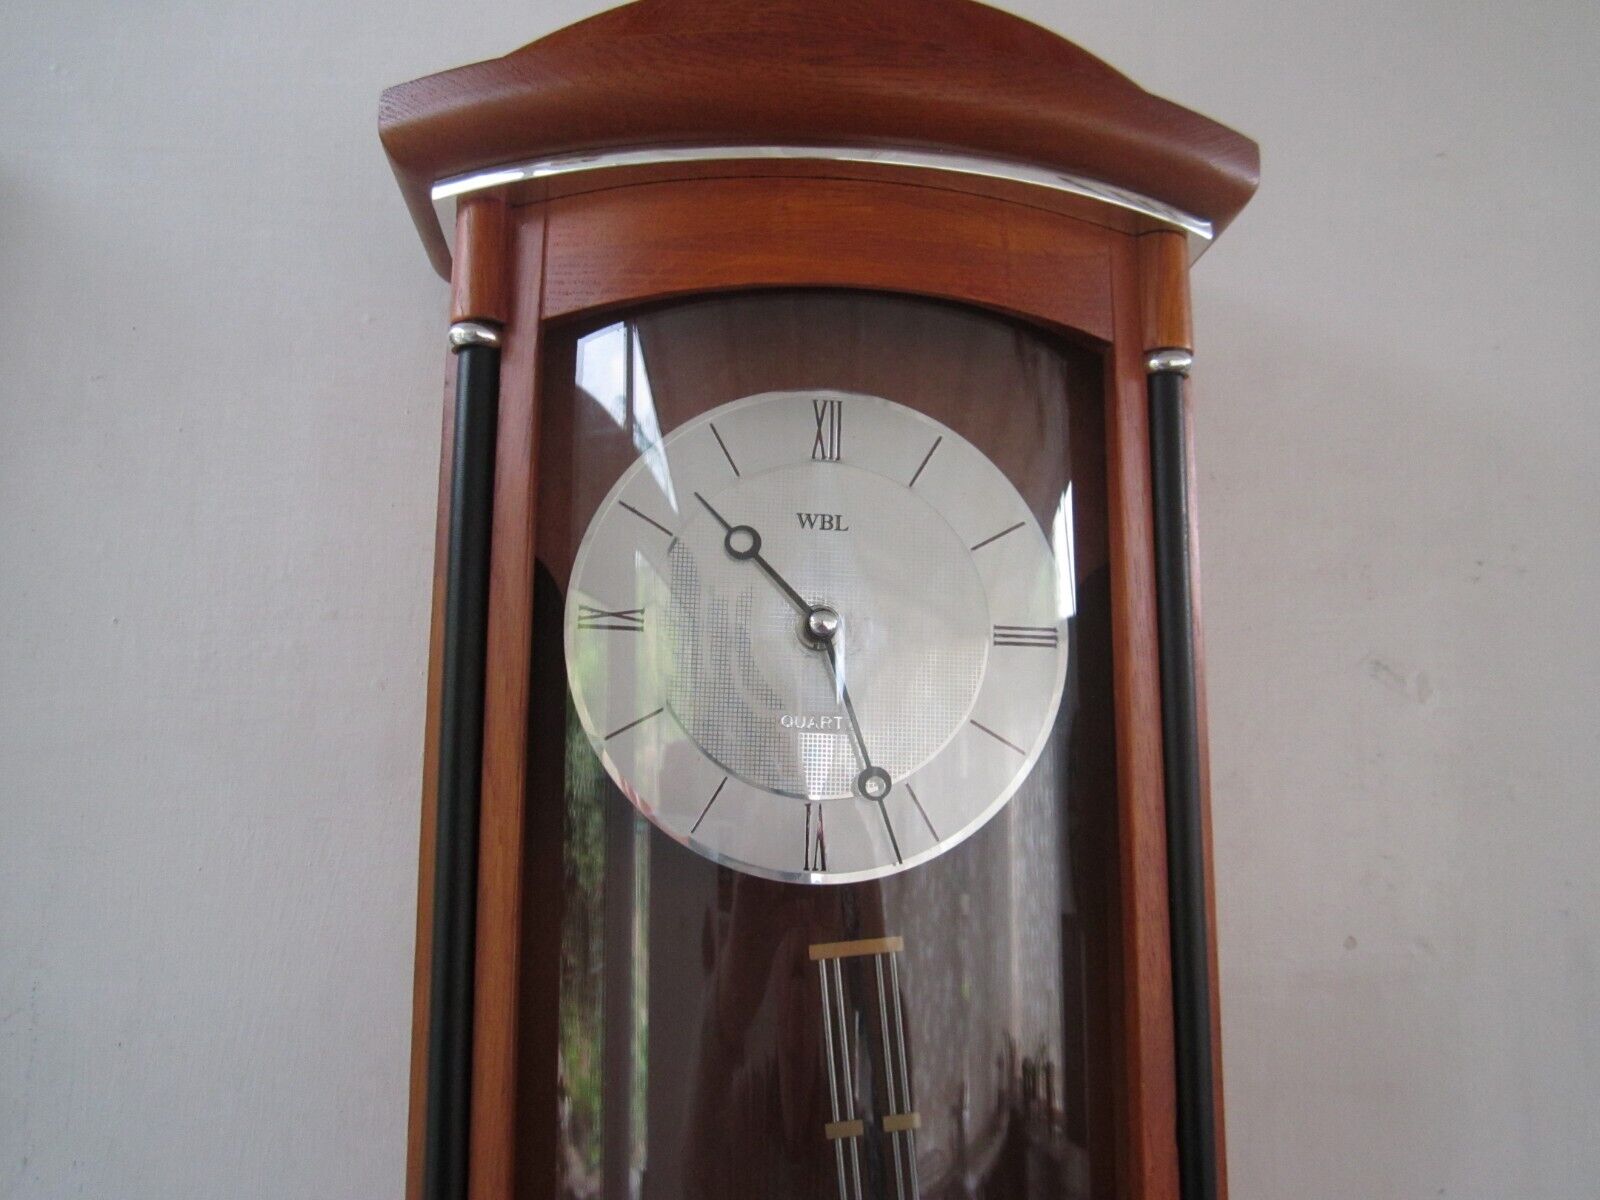 VINTAGE QUARTZ WALL CLOCK - IMMACULATE CONDITION.